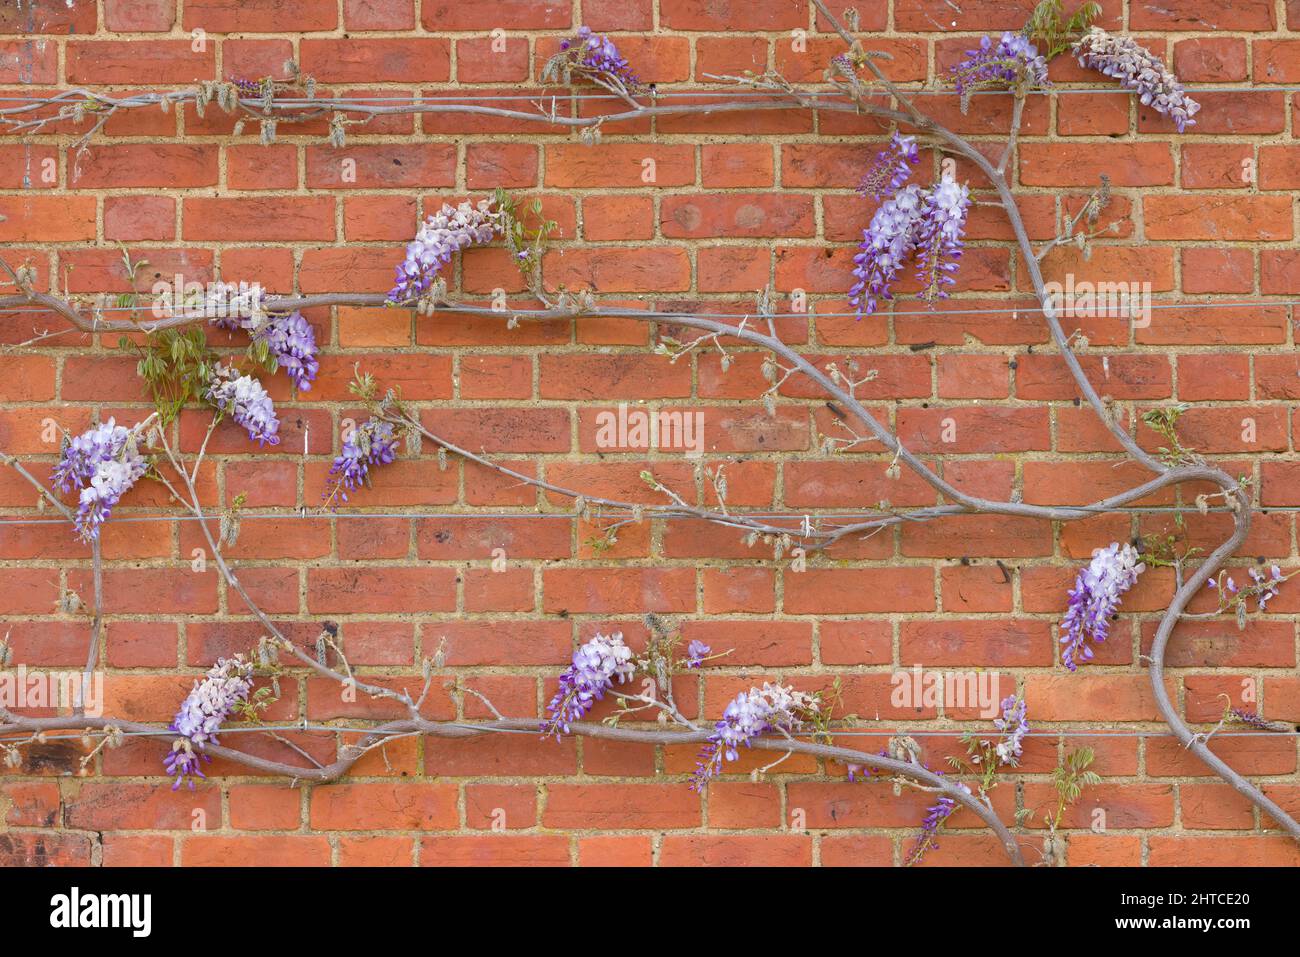 Wisteria vines, training a climbing plant or tree on a house wall in spring, UK, with wire rope for support. Stock Photo